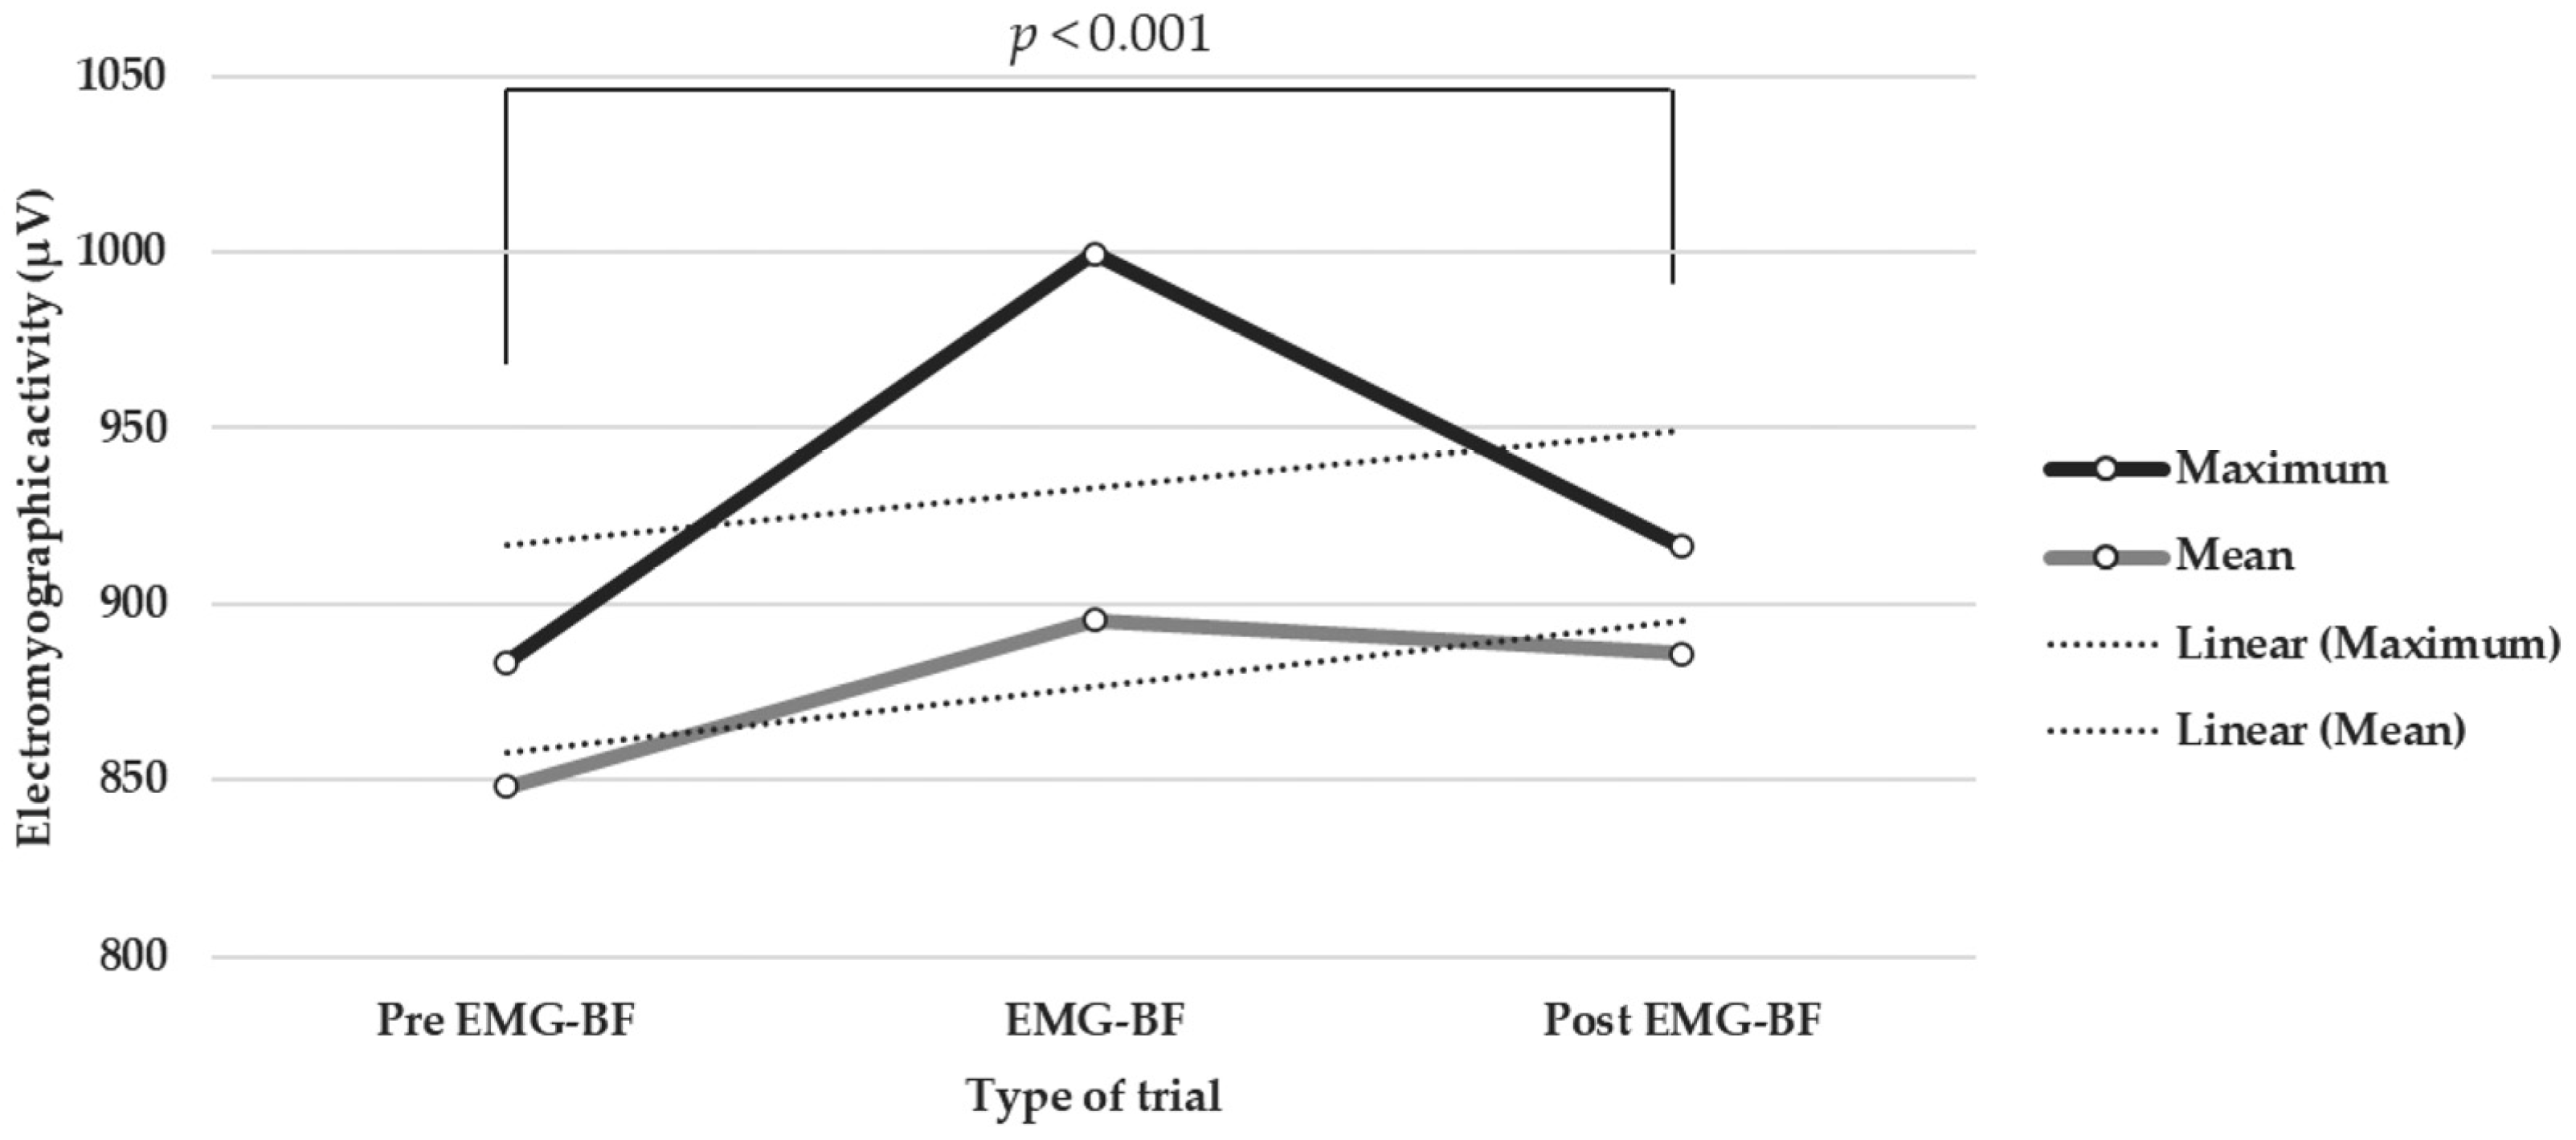 Neuromuscular Electrical Stimulation And Quadriceps Strength Following  Patellar Fracture And Open Reduction Internal Fixation Surgery: A Case  Report